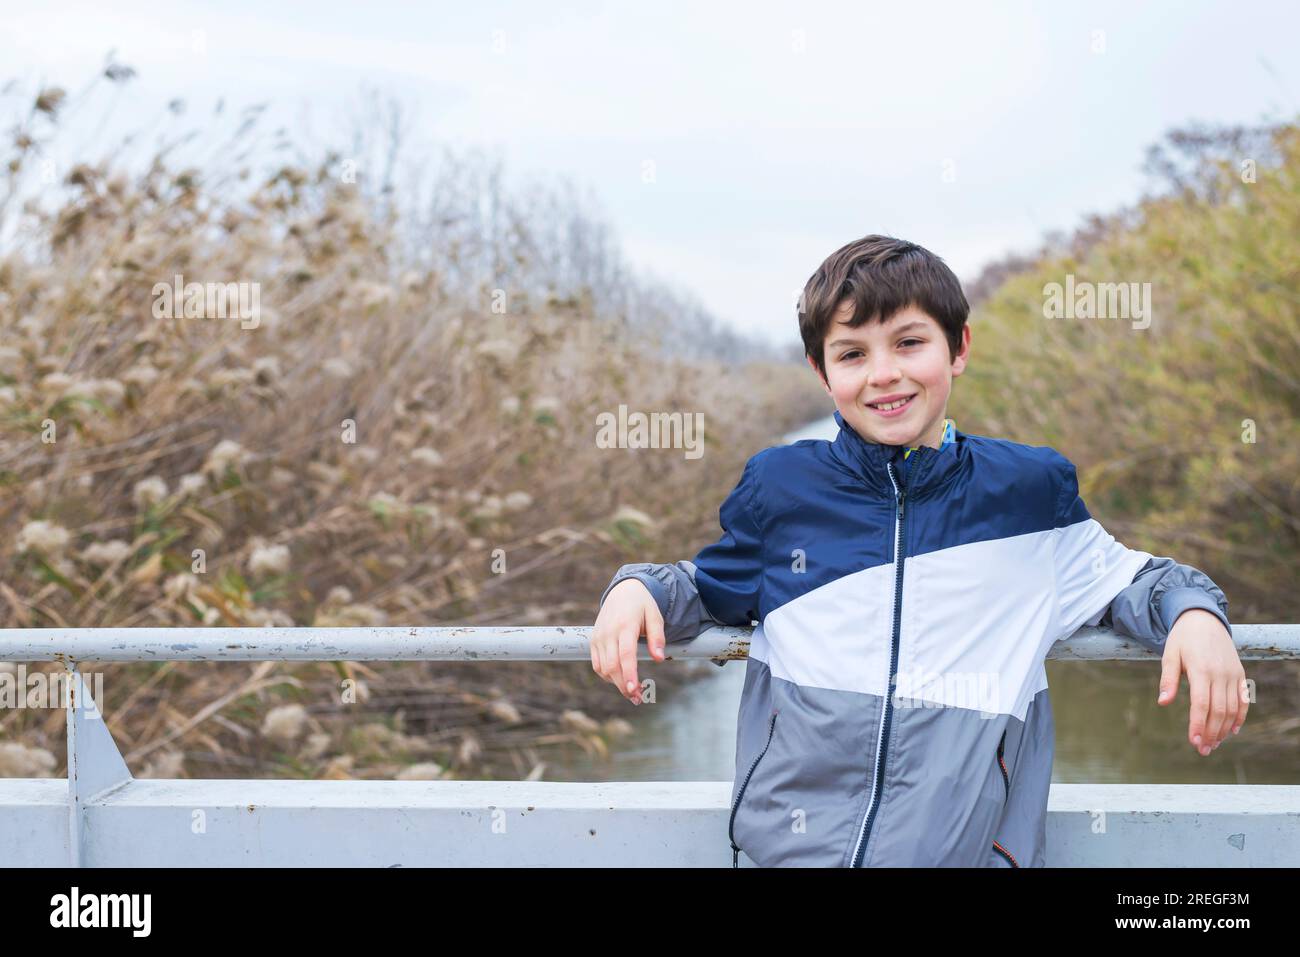 Full length portrait of young teen standing by railing on bridge while looking camera and smiling against river Stock Photo